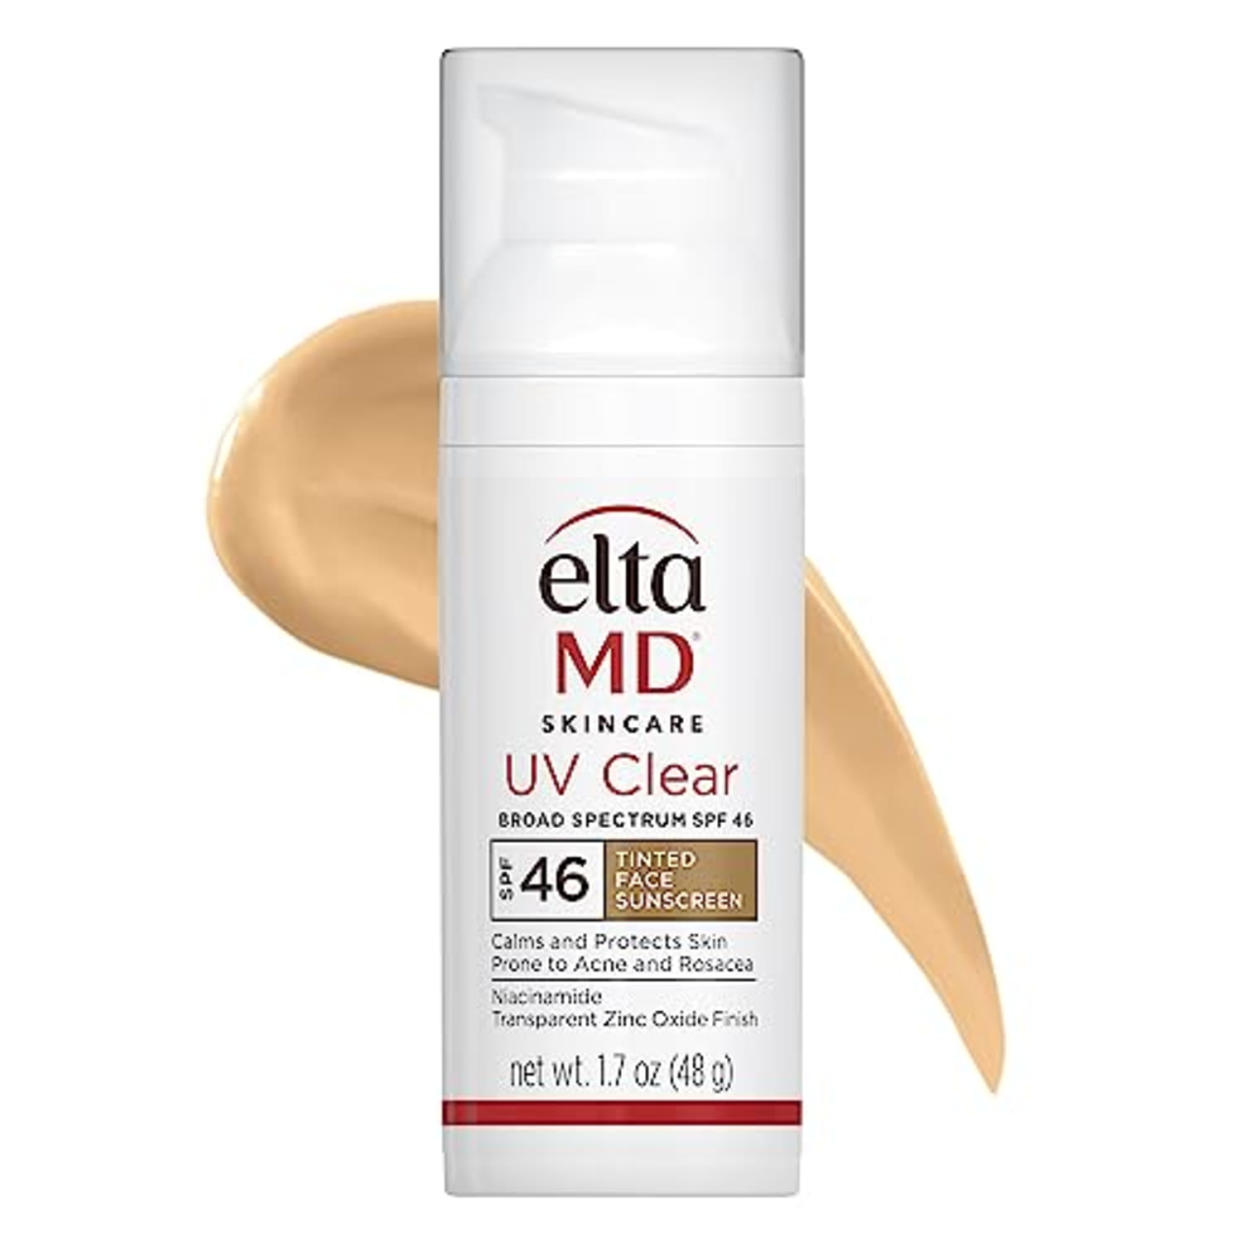 EltaMD UV Clear Tinted Face Sunscreen, SPF 46 Oil Free Sunscreen with Zinc Oxide, Protects and Calms Sensitive Skin and Acne-Prone Skin, Lightweight, Tinted, Dermatologist Recommended, 1.7 oz Pump (AMAZON)